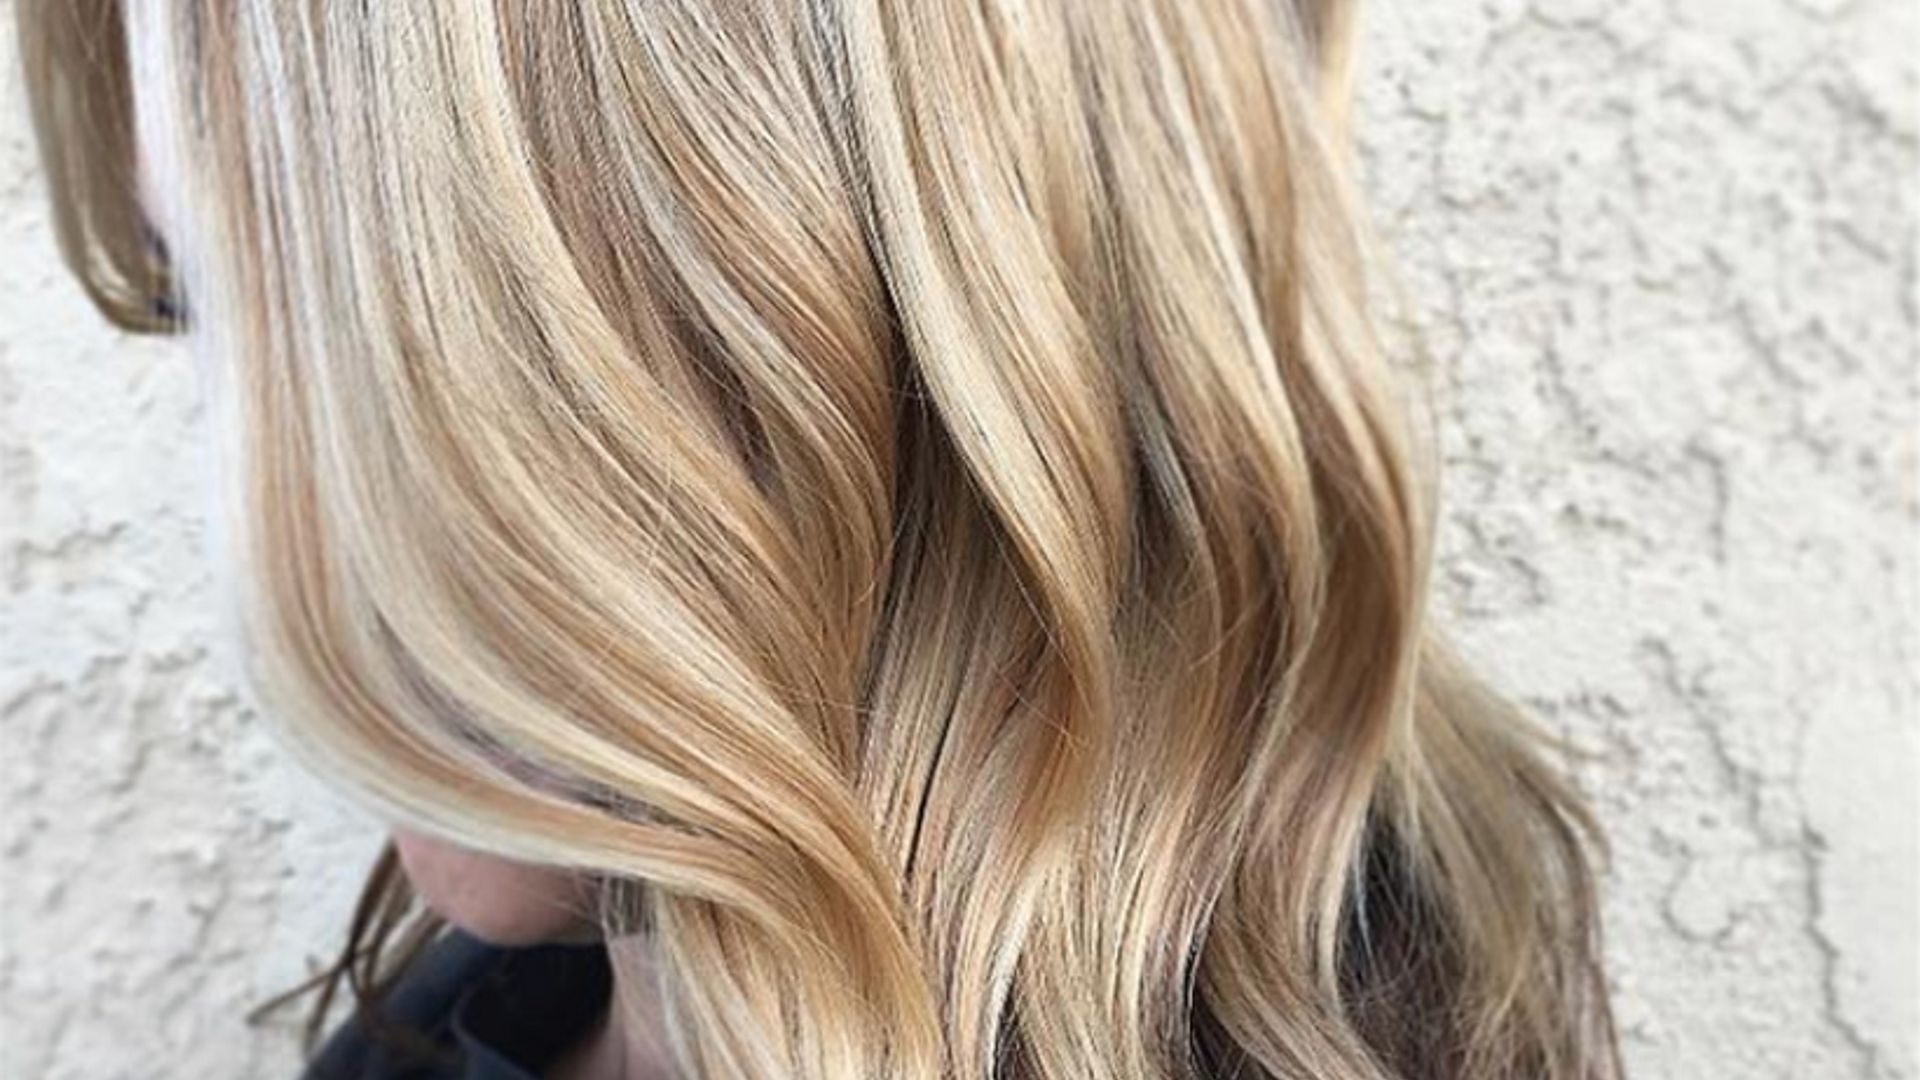 The Reverse Balayage Is The New Hair Trend Taking Over Instagram